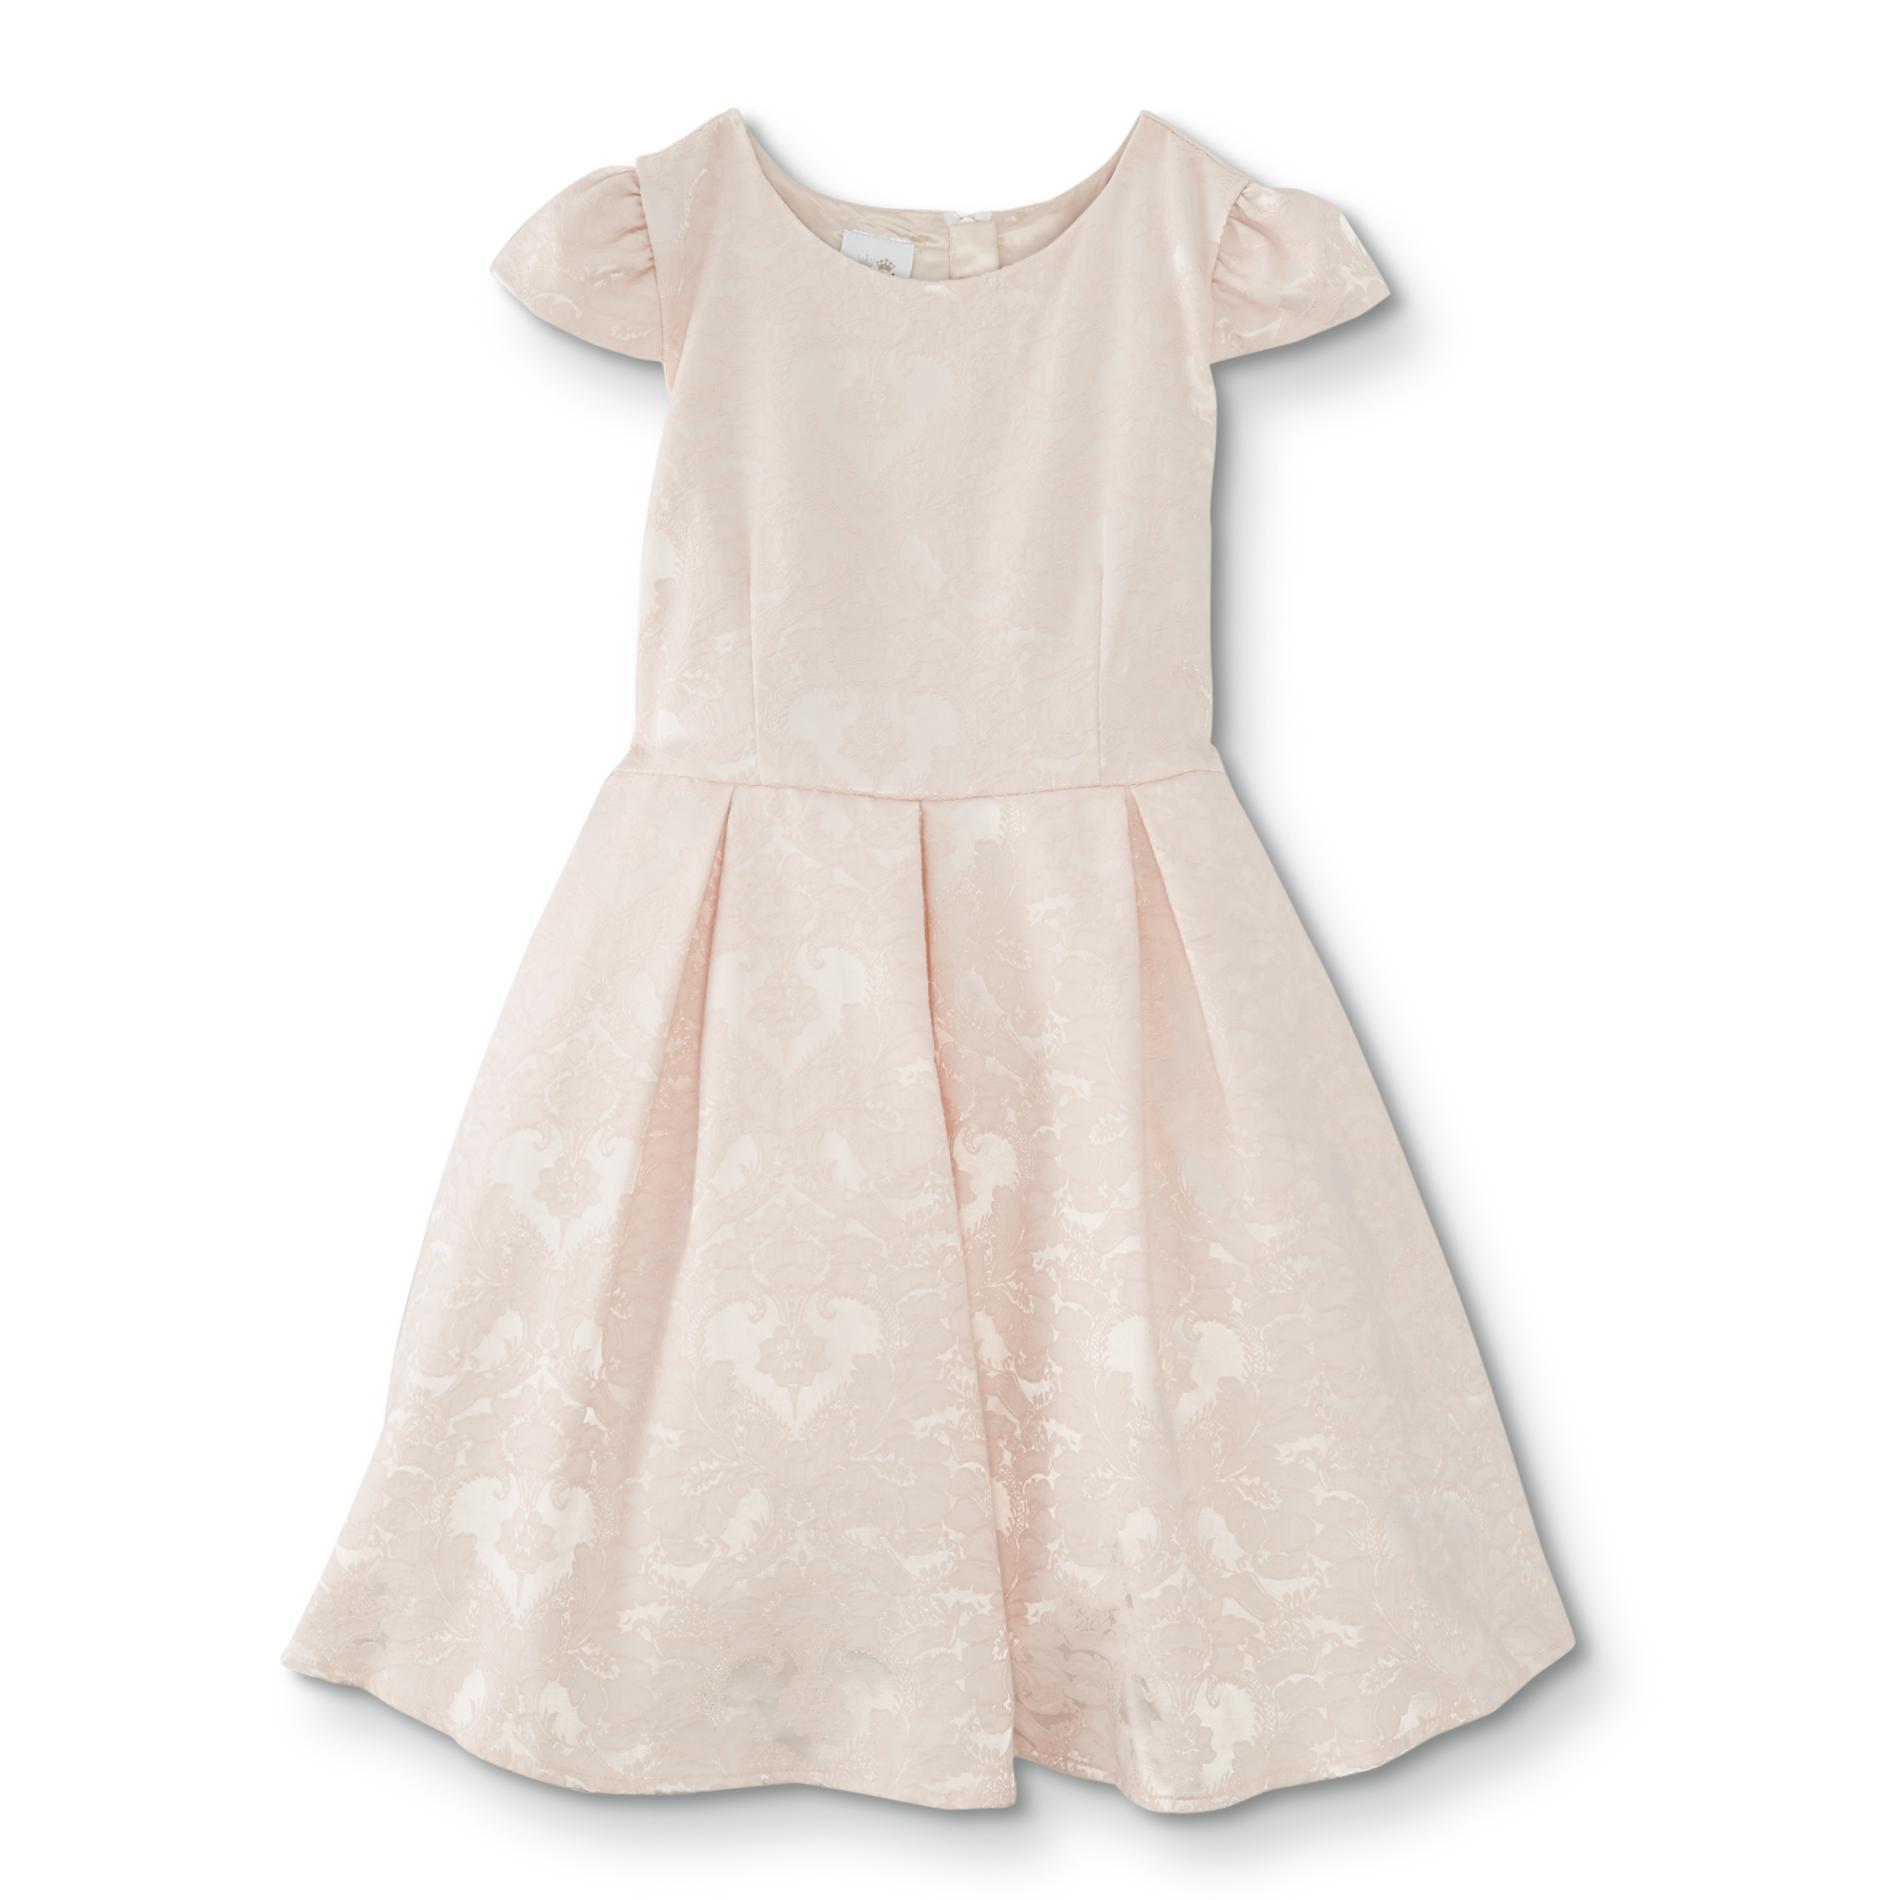 Special Editions Girls' Embellished Party Dress - Abstract Floral